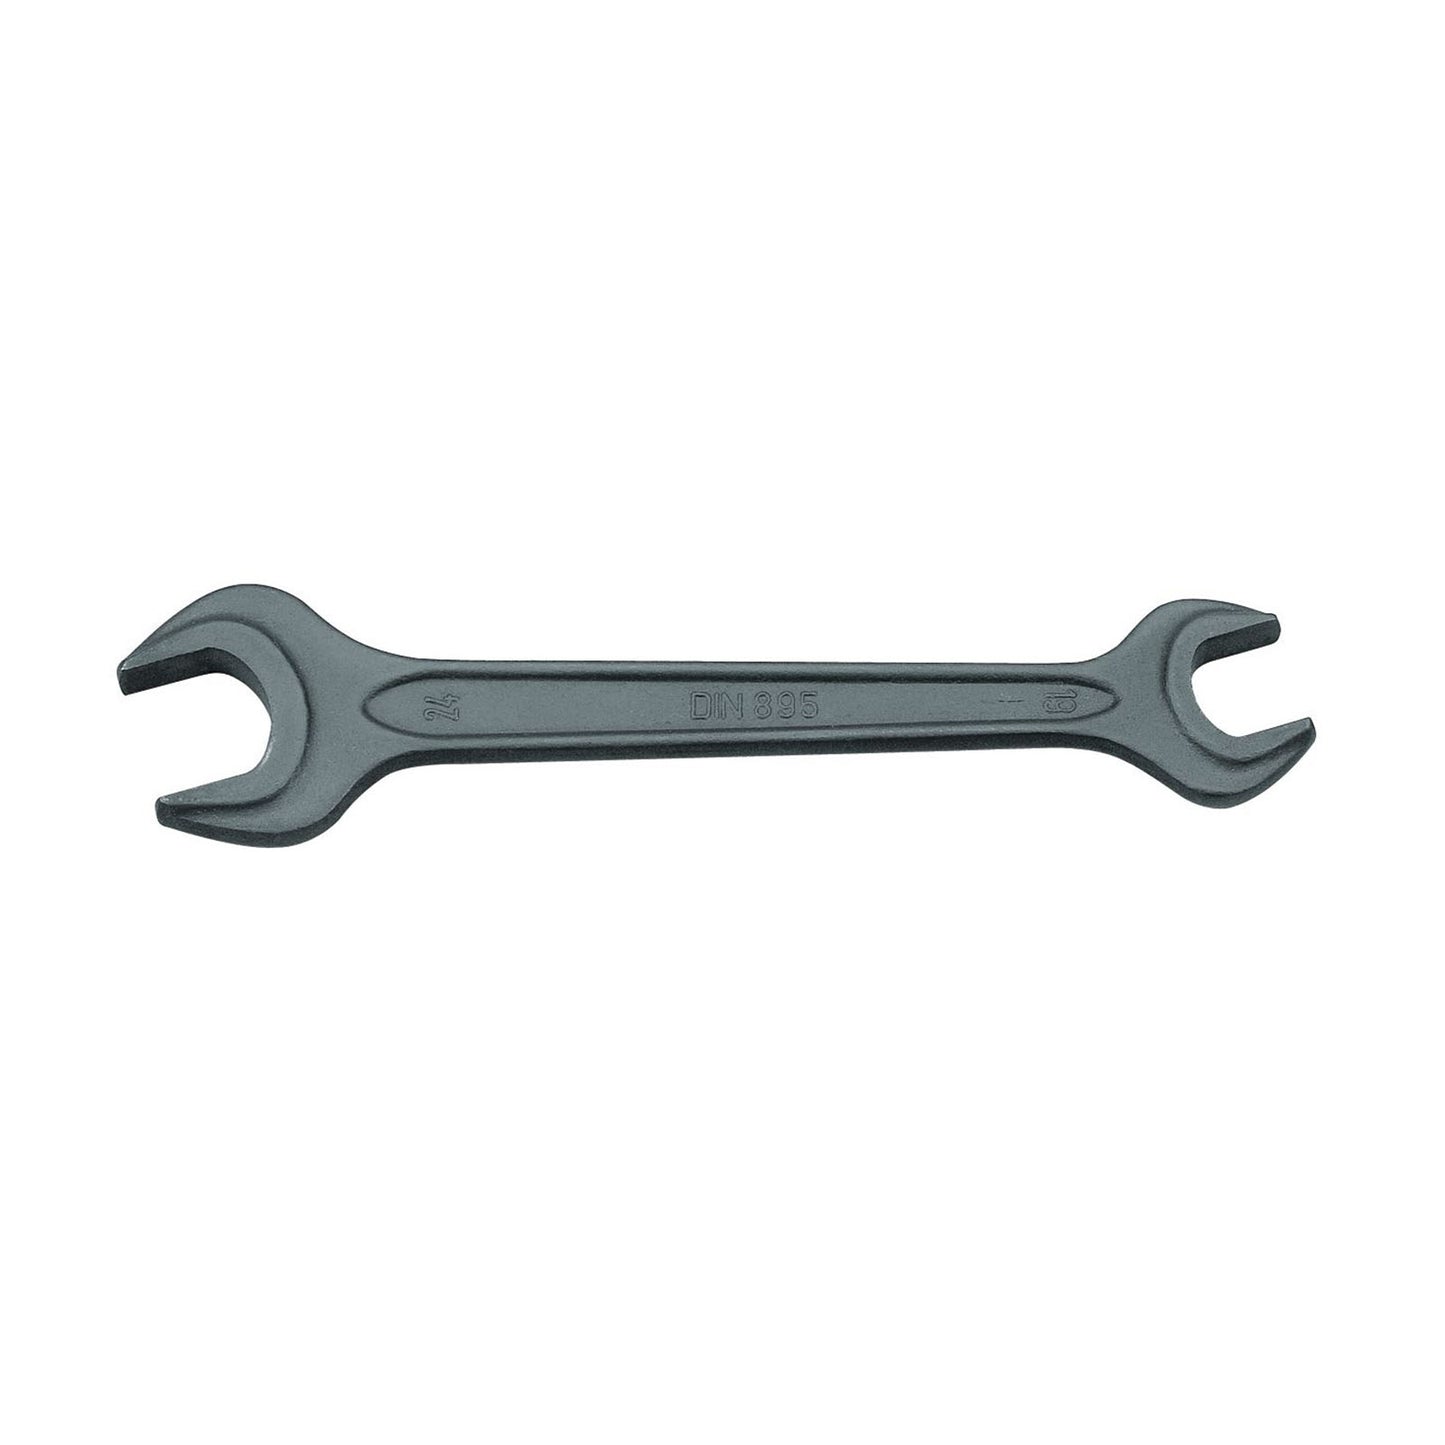 GEDORE 895 14X15 - 2-Mount Fixed Wrench, 14x15 (6585880)